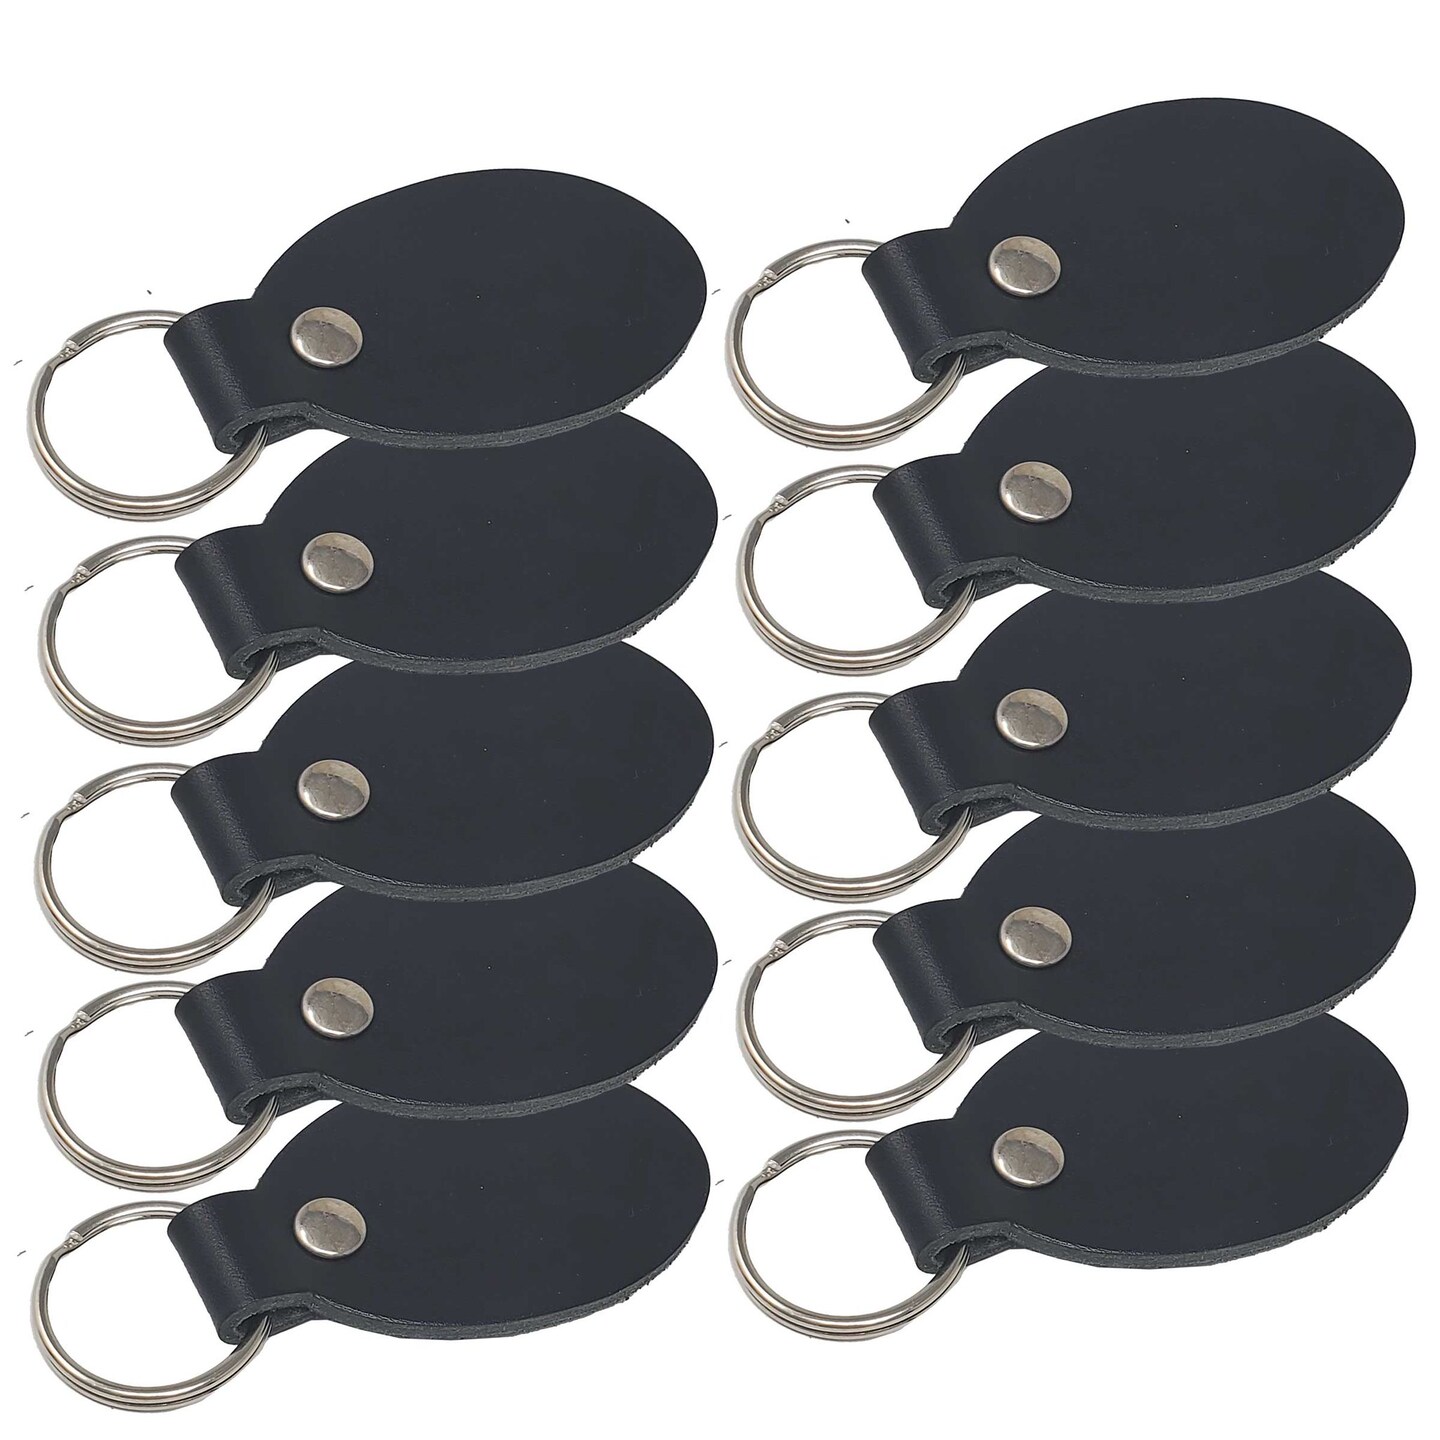 Leather Key Chains Blank 10 Pack - Hot Stamping, Embossing, Laser Engraving  Ready-Promotional, Business gifts